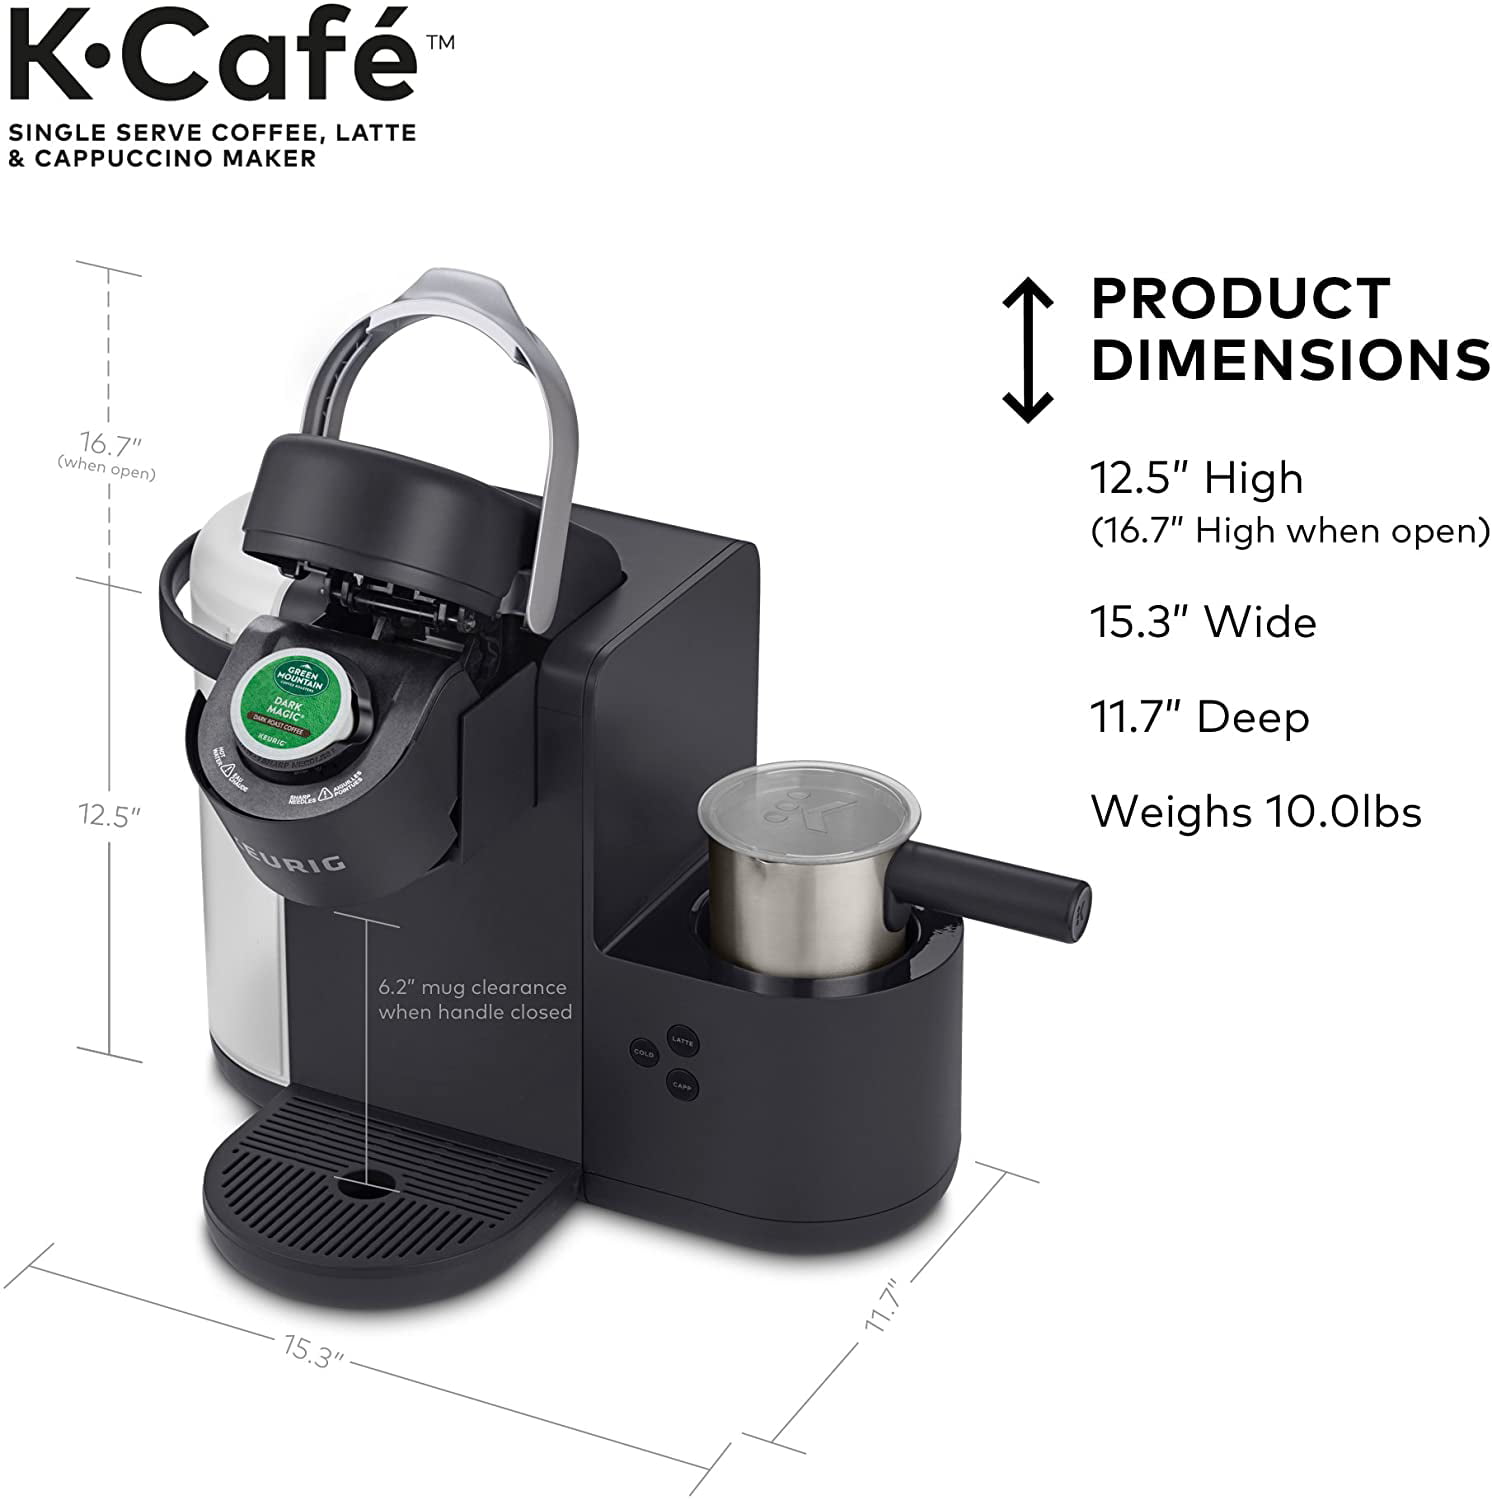 Keurig K-Café Milk Frother Cup Replacement Part or Extra,80 Milliliters Hot and Cold Frothing, Compatible with Keurig K-Café Coffee Makers Only